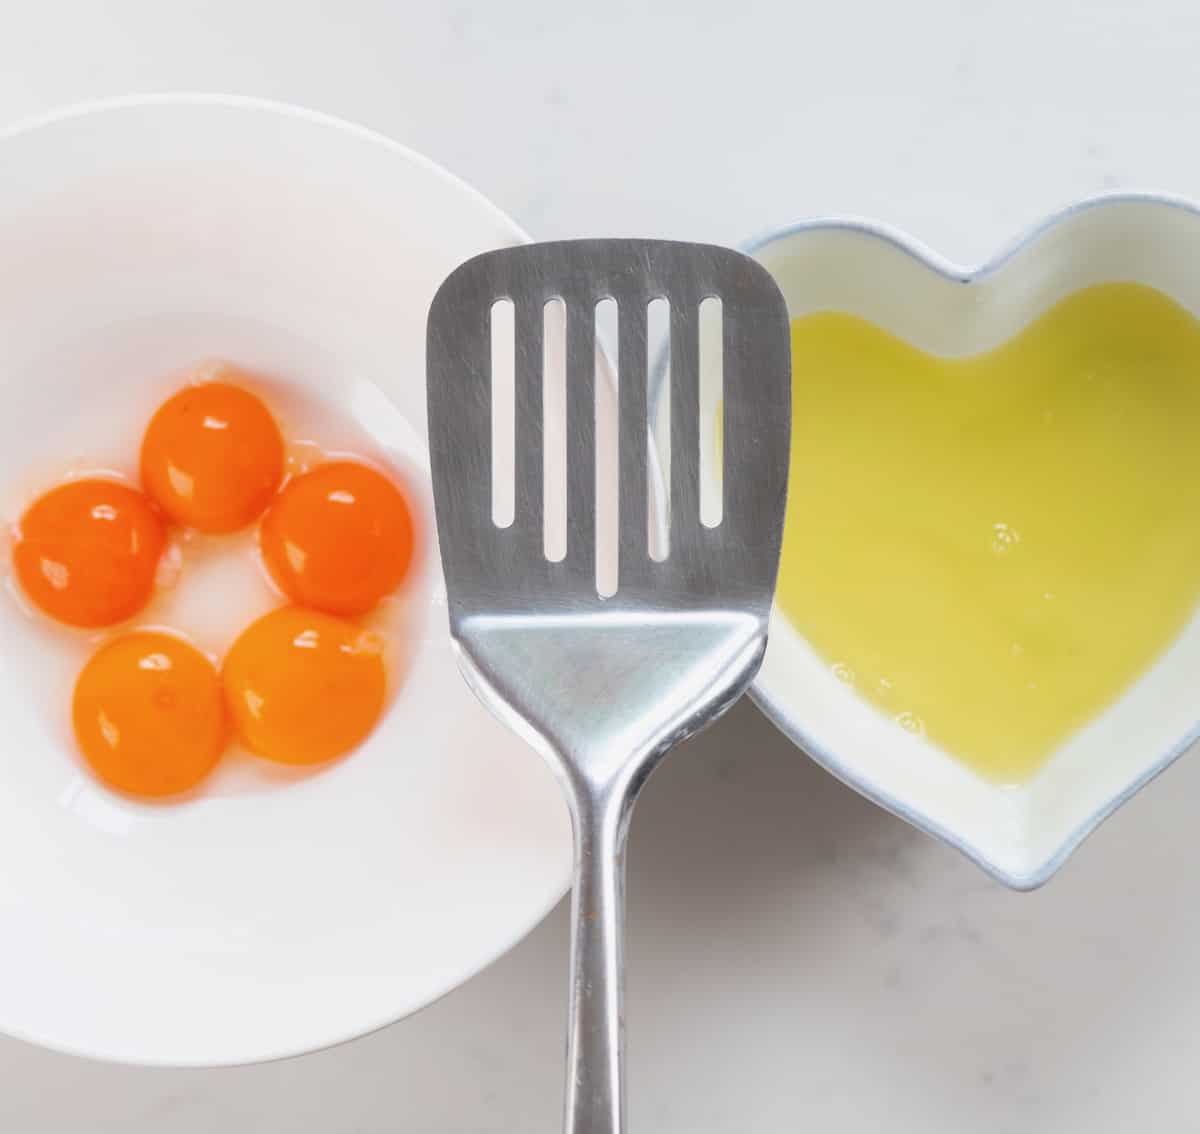 Separated egg yolks and egg whites in different bowls